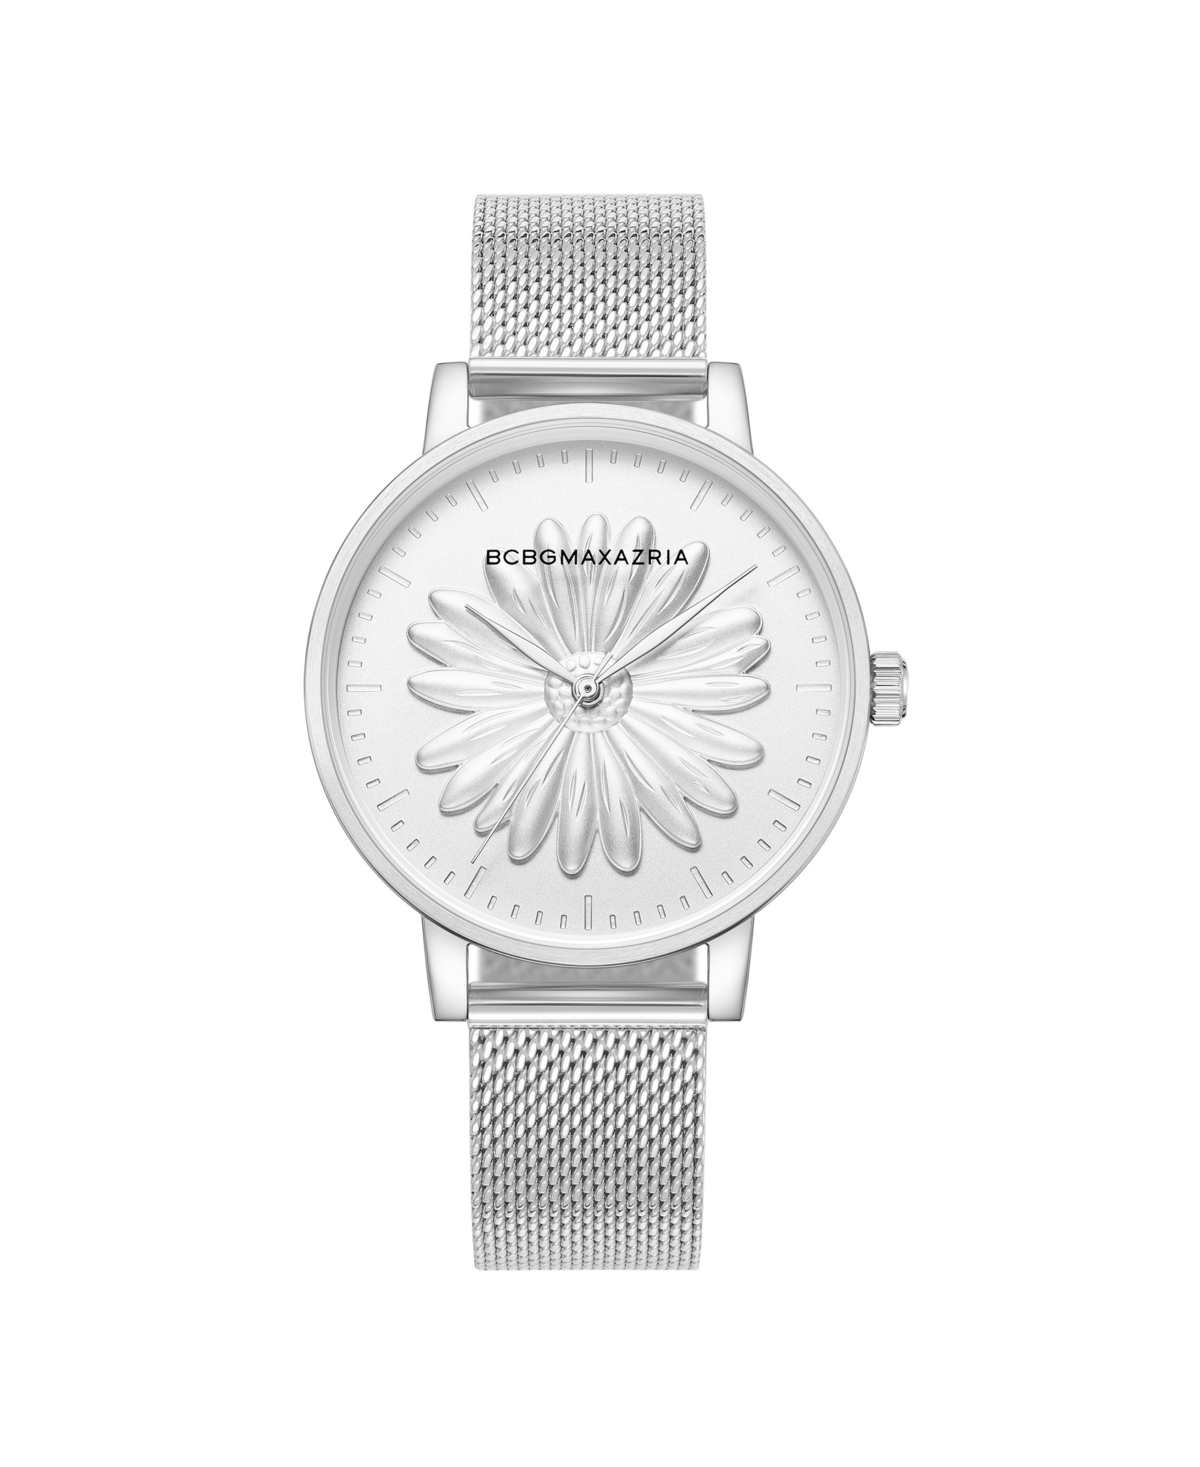 Bcbgmaxazria Women's Classic Silver-Tone Stainless Steel Mesh Floral Watch 38mm